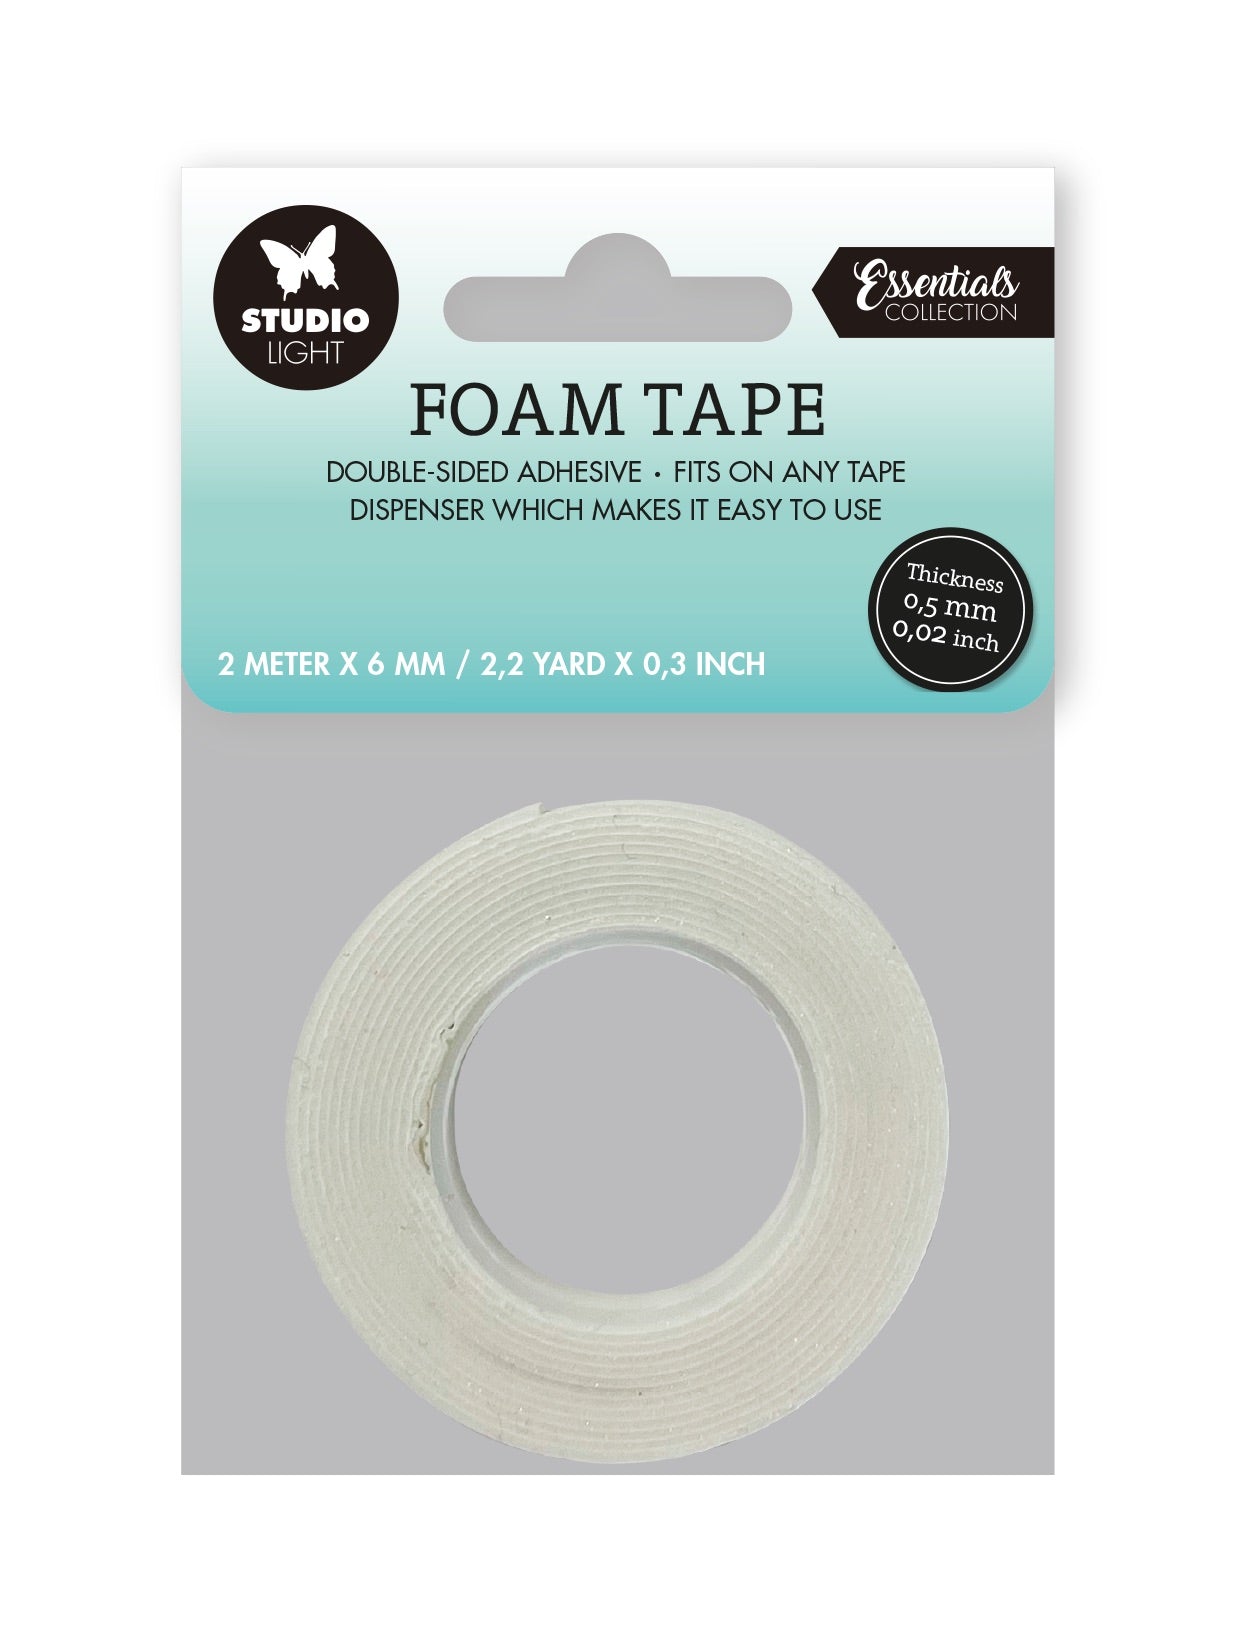 SL Doublesided Foam Tape 0.5mm Thick - 0.6mm Wide Essential Tools 55x55x0.6mm 2 MT nr.01